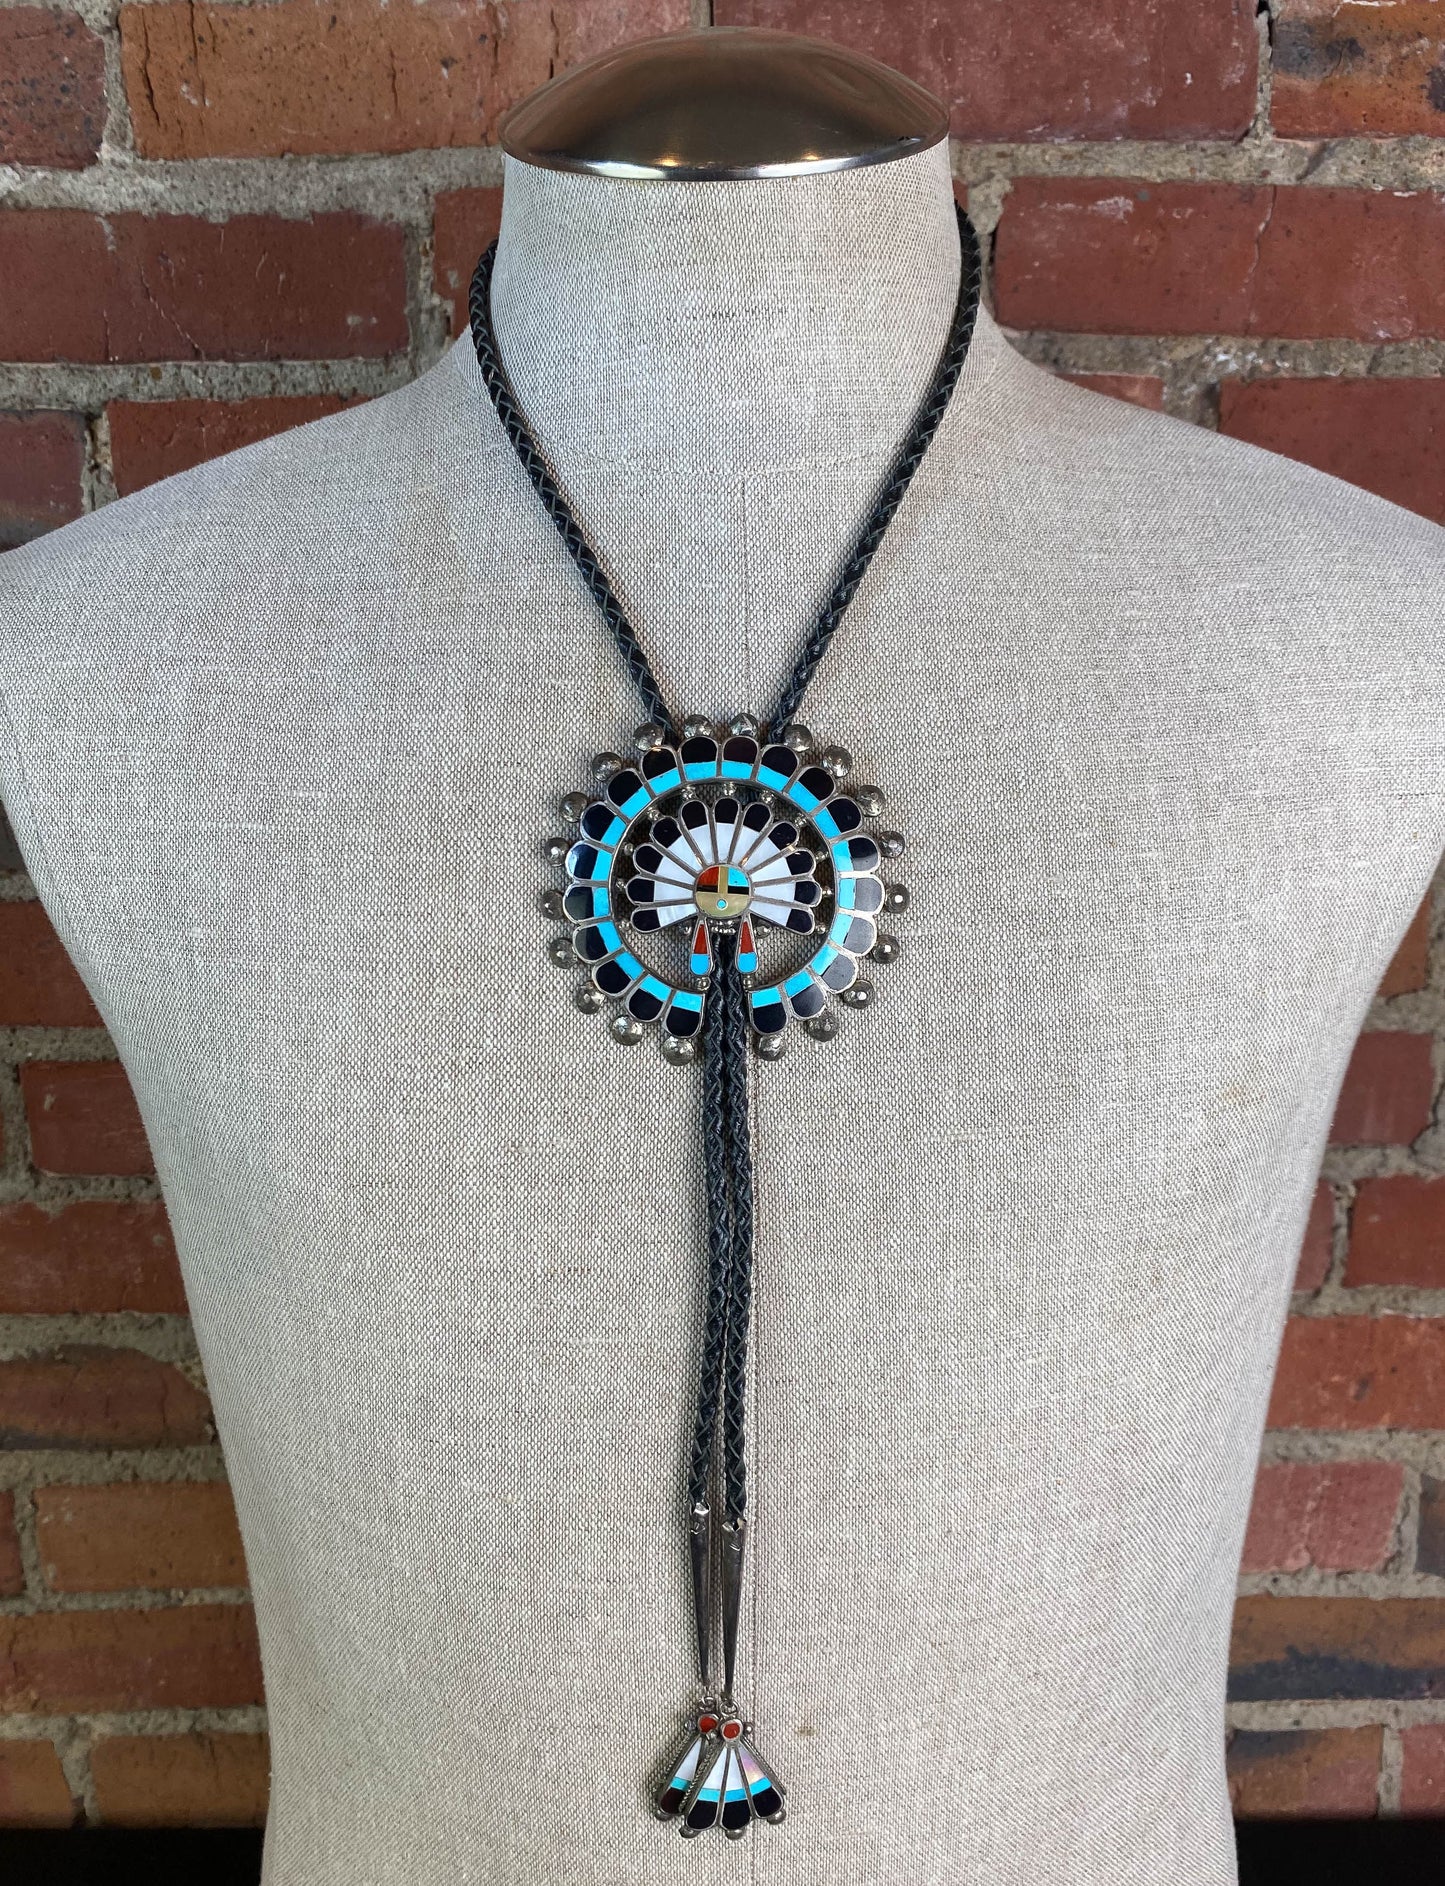 Vintage 70's Zuni Inlay Sunface Bolo Tie Sterling Silver Turquoise Coral Mother of Pearl Braided Black Leather Unisex